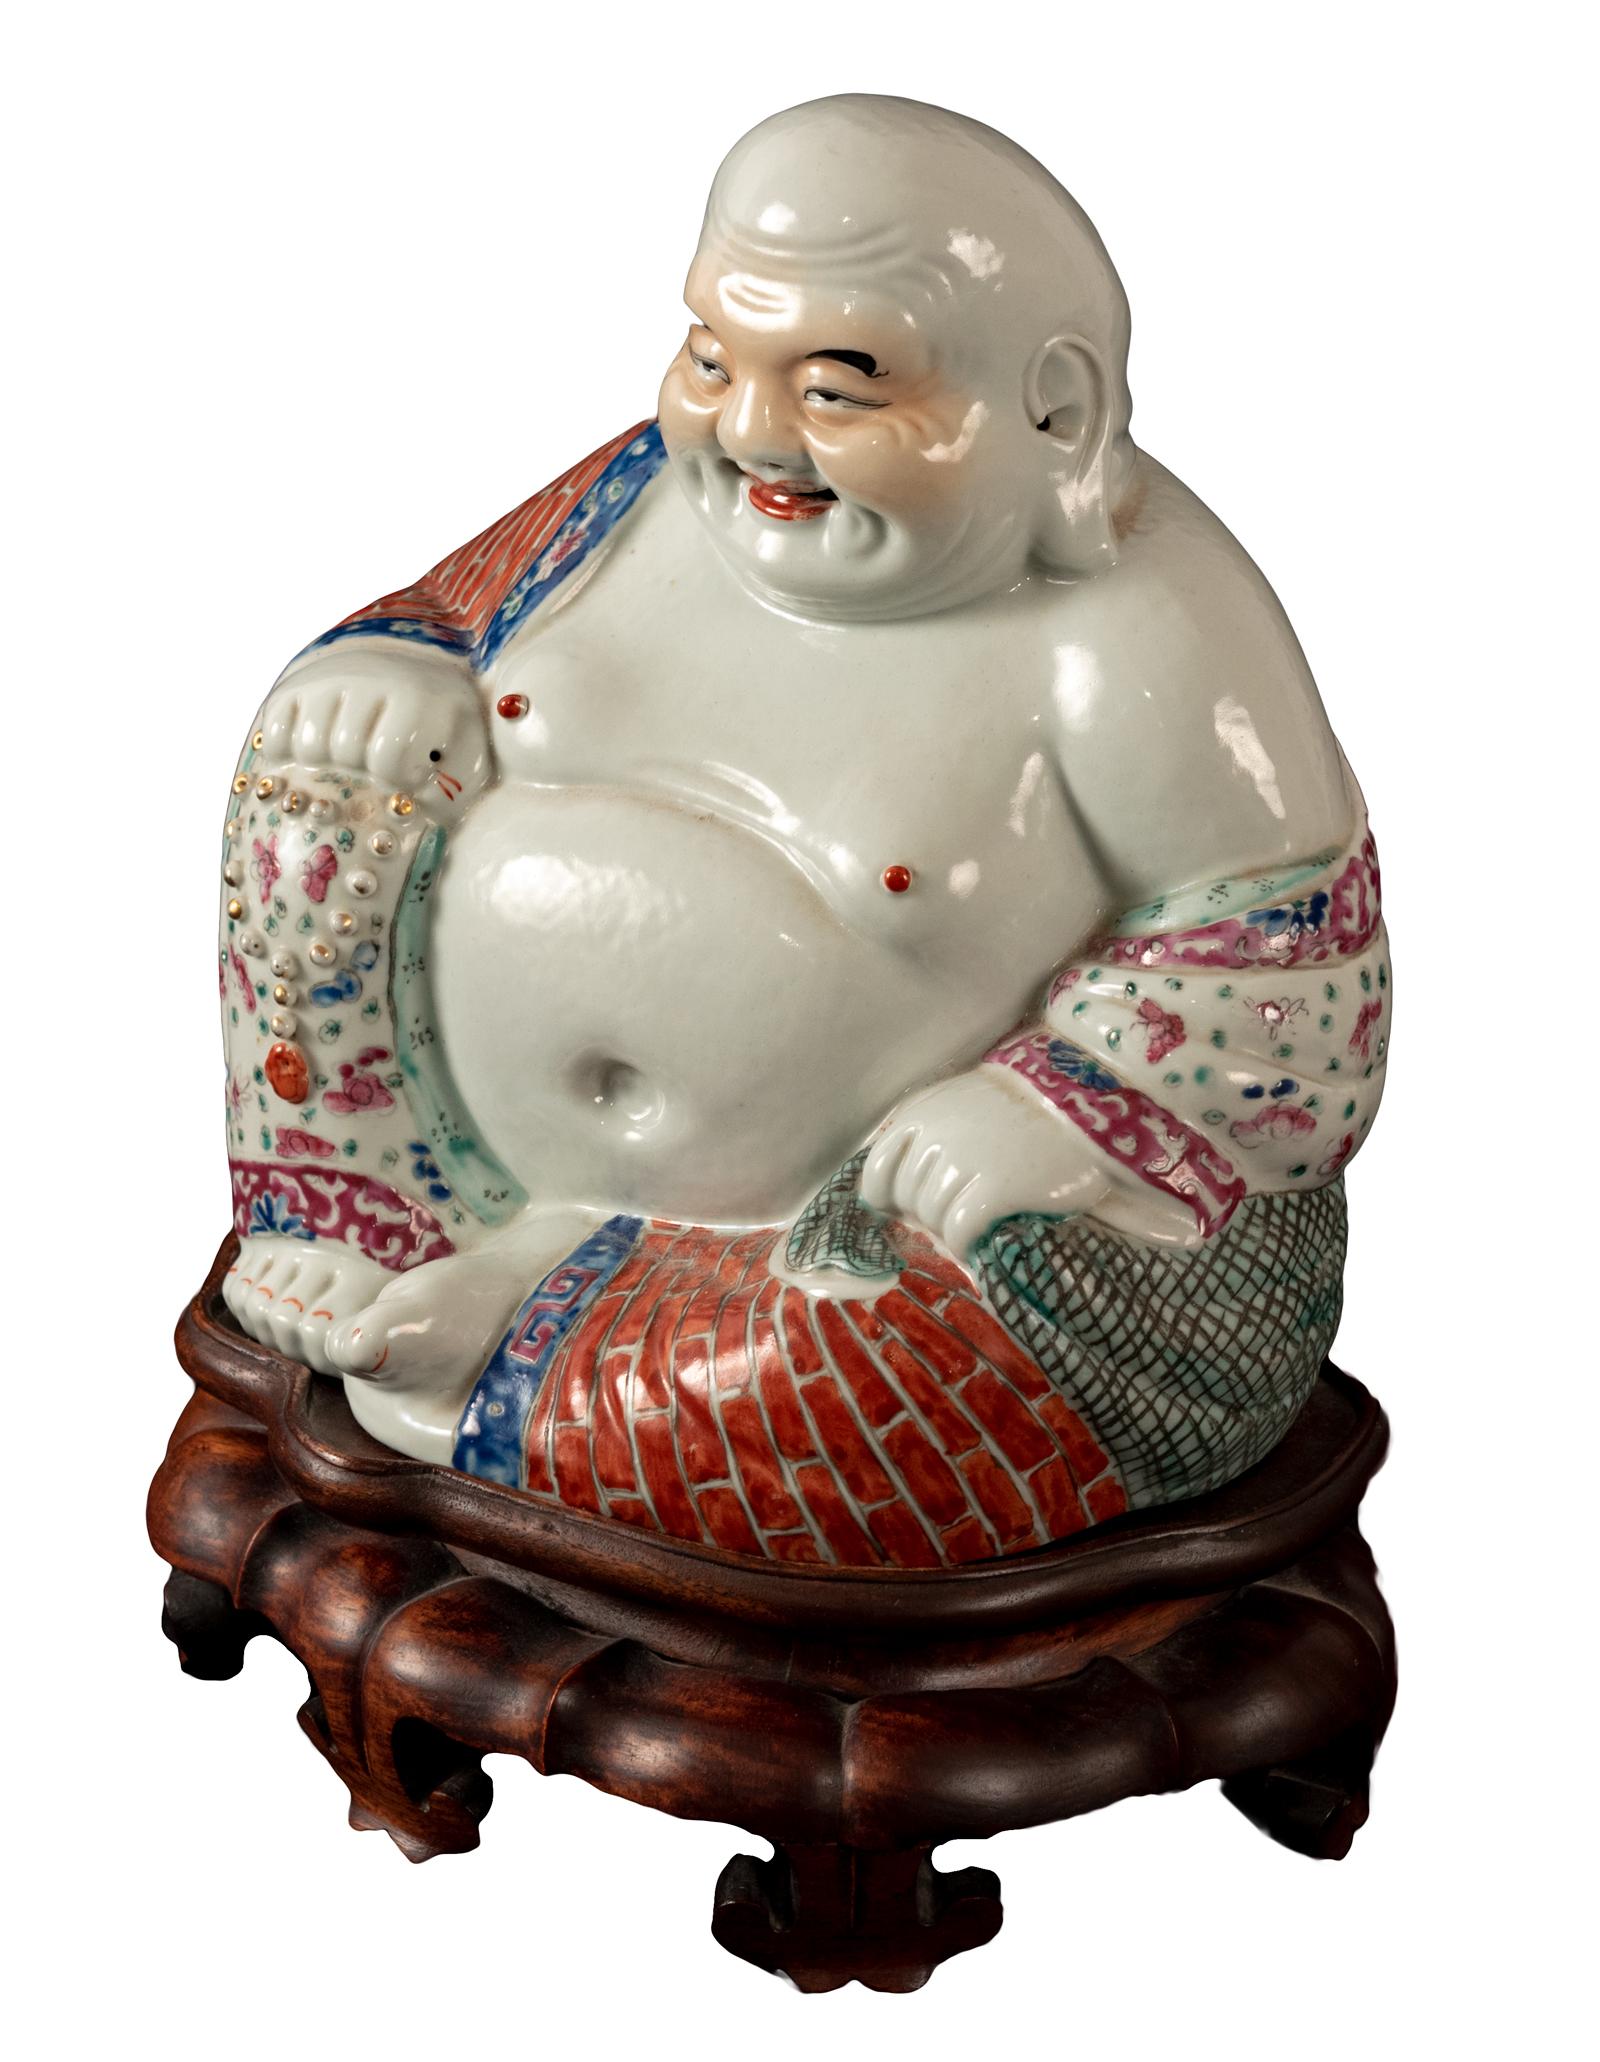 A very fine porcelain Hotei or Laughing Buddha statue on conforming carved wood stand (circa 1900) late Qing period.